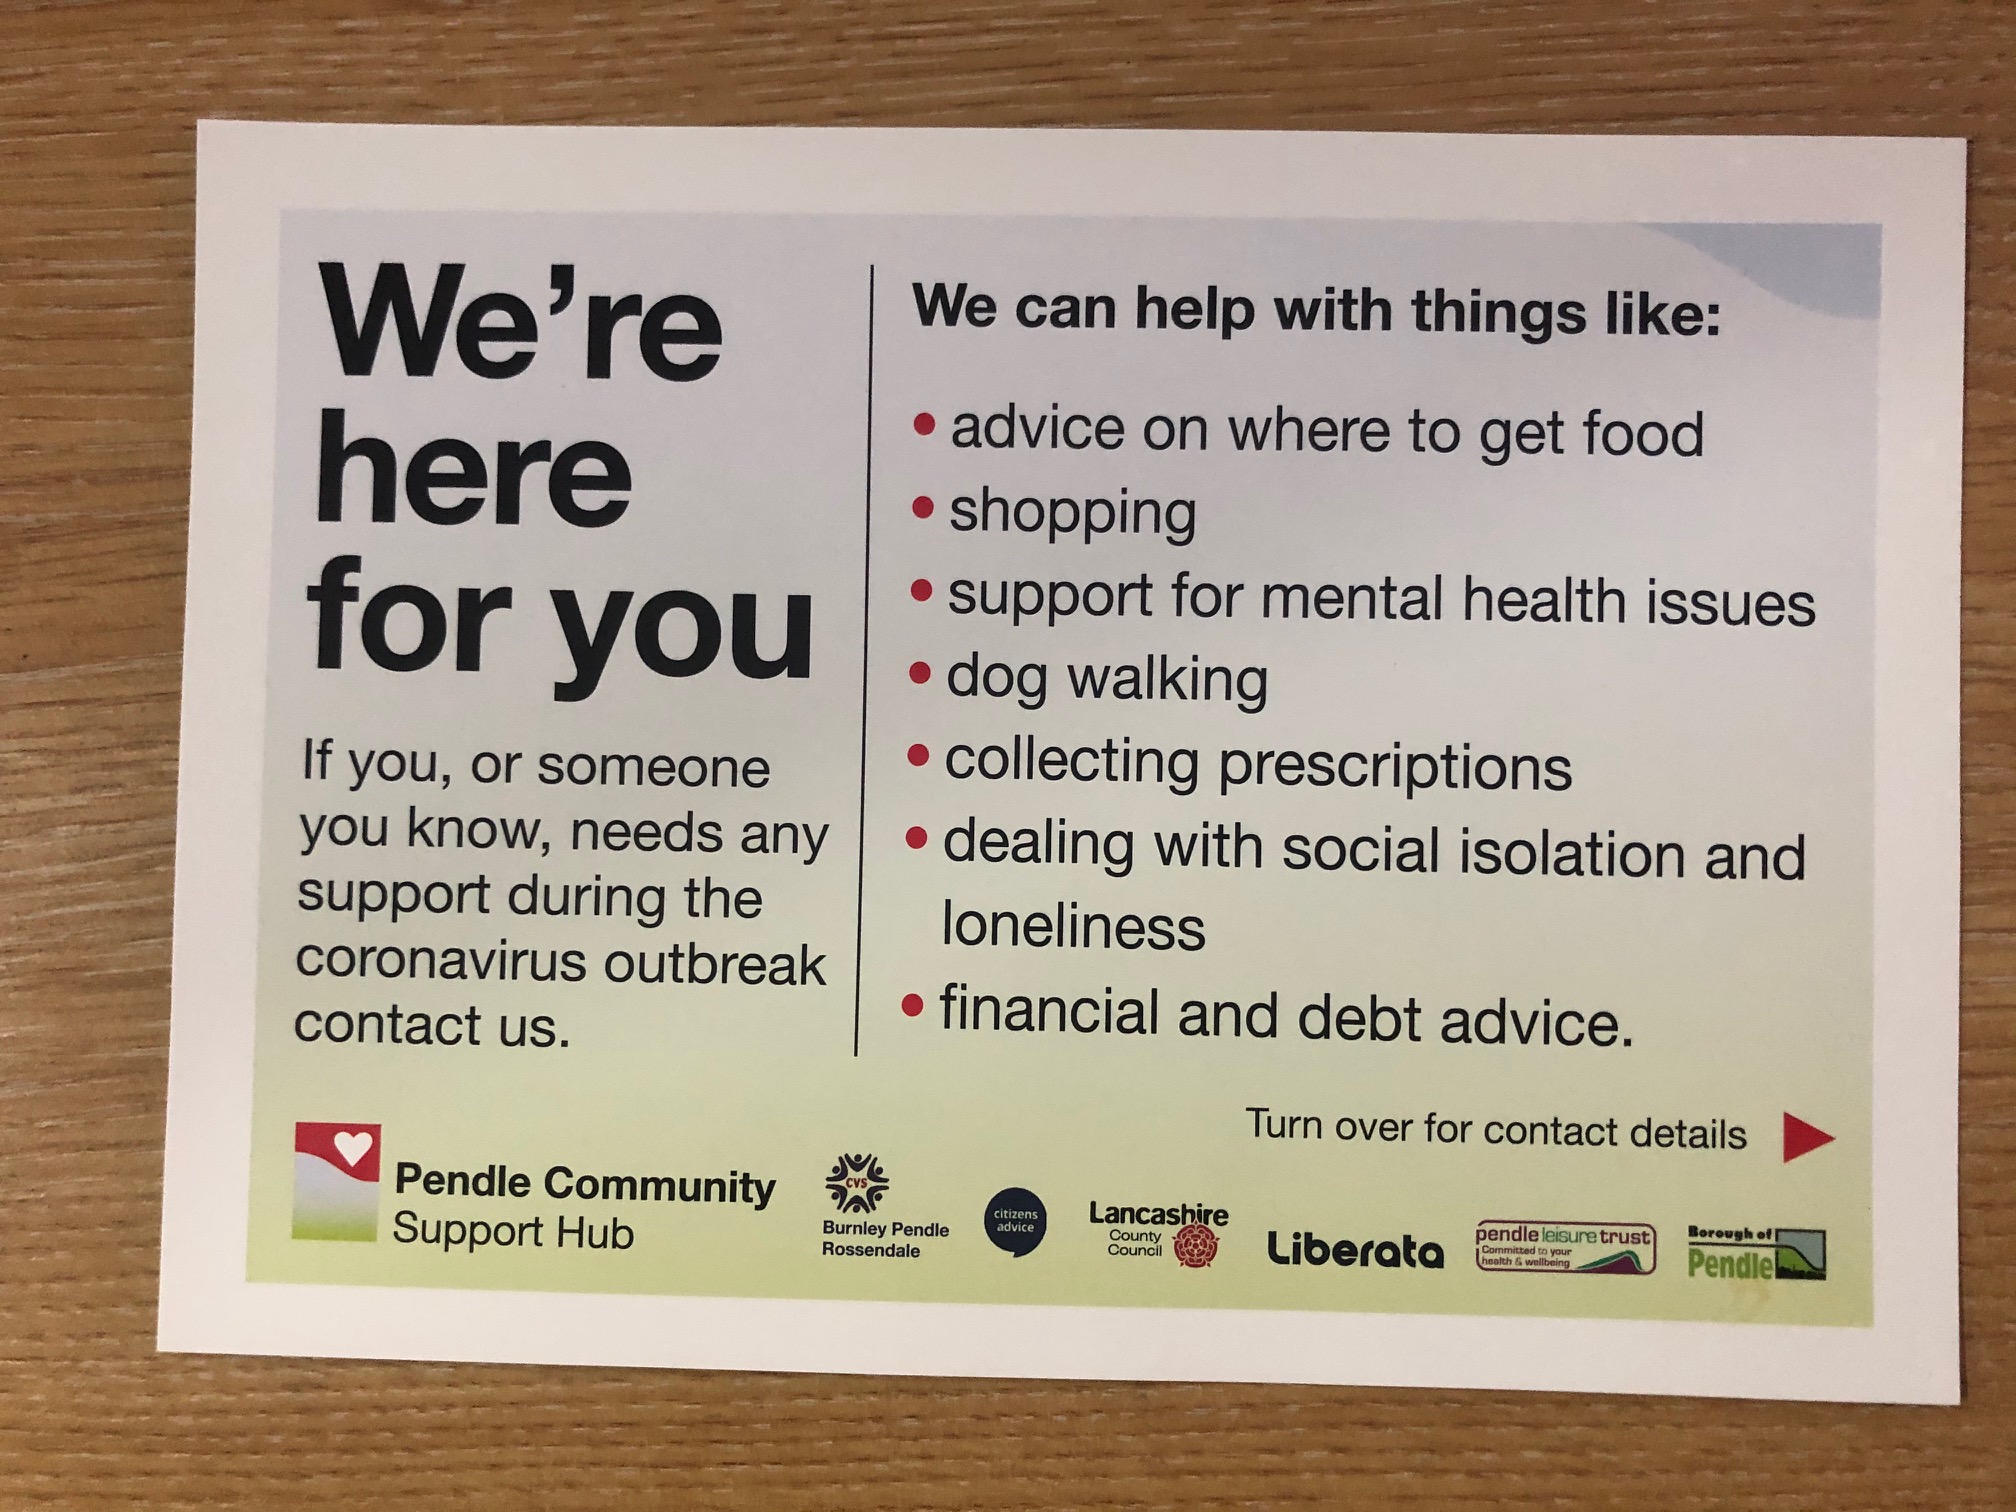 More than 40,000 postcards being delivered to Pendle homes promoting Community Support Hub